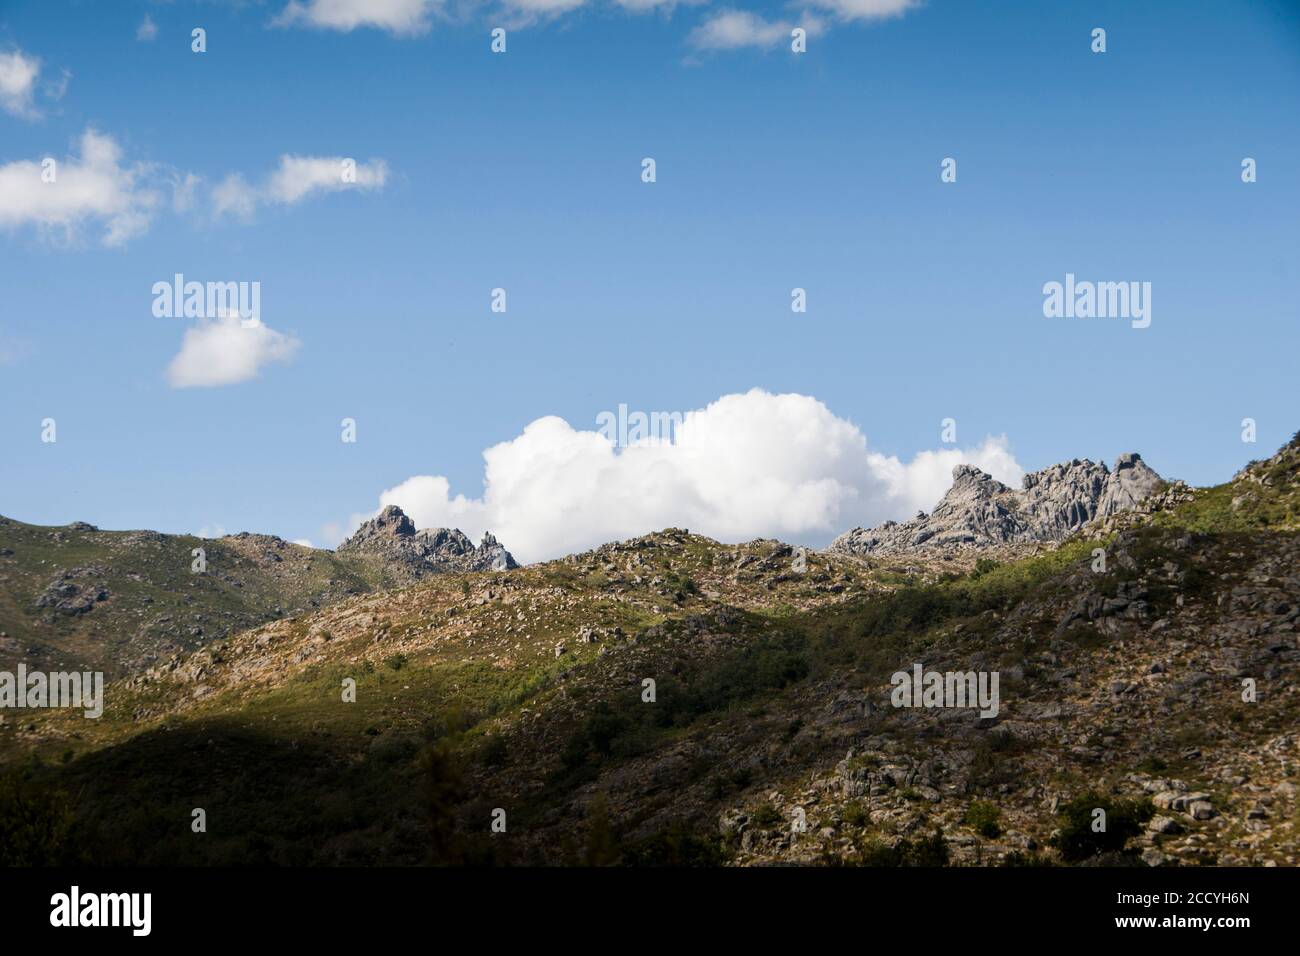 Rocky mountain range formations stand in the horizon view, under blue sky and white clouds. Serene mountain landscape Stock Photo